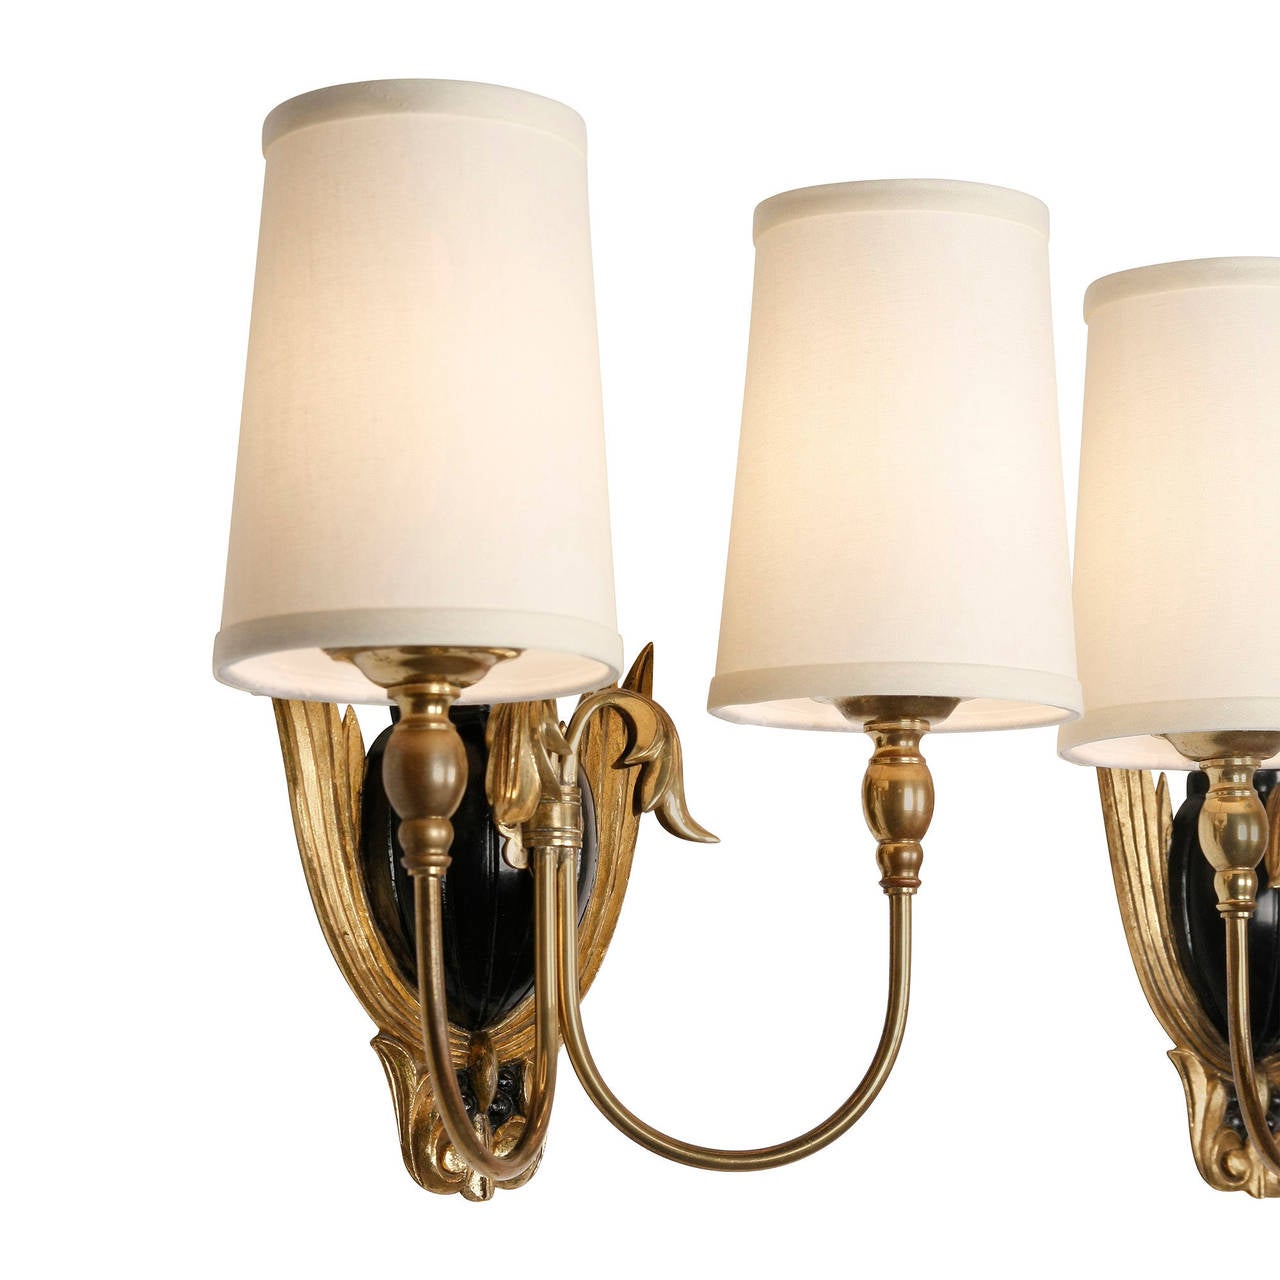 Pair of gilt and lacquered carved wood wall sconces, the black lacquered urn shaped wall mount flanked by gilt wood foliates, each sconce with two looping brass arms, in custom silk shades, French, 1940s. Overall height 14 1/2